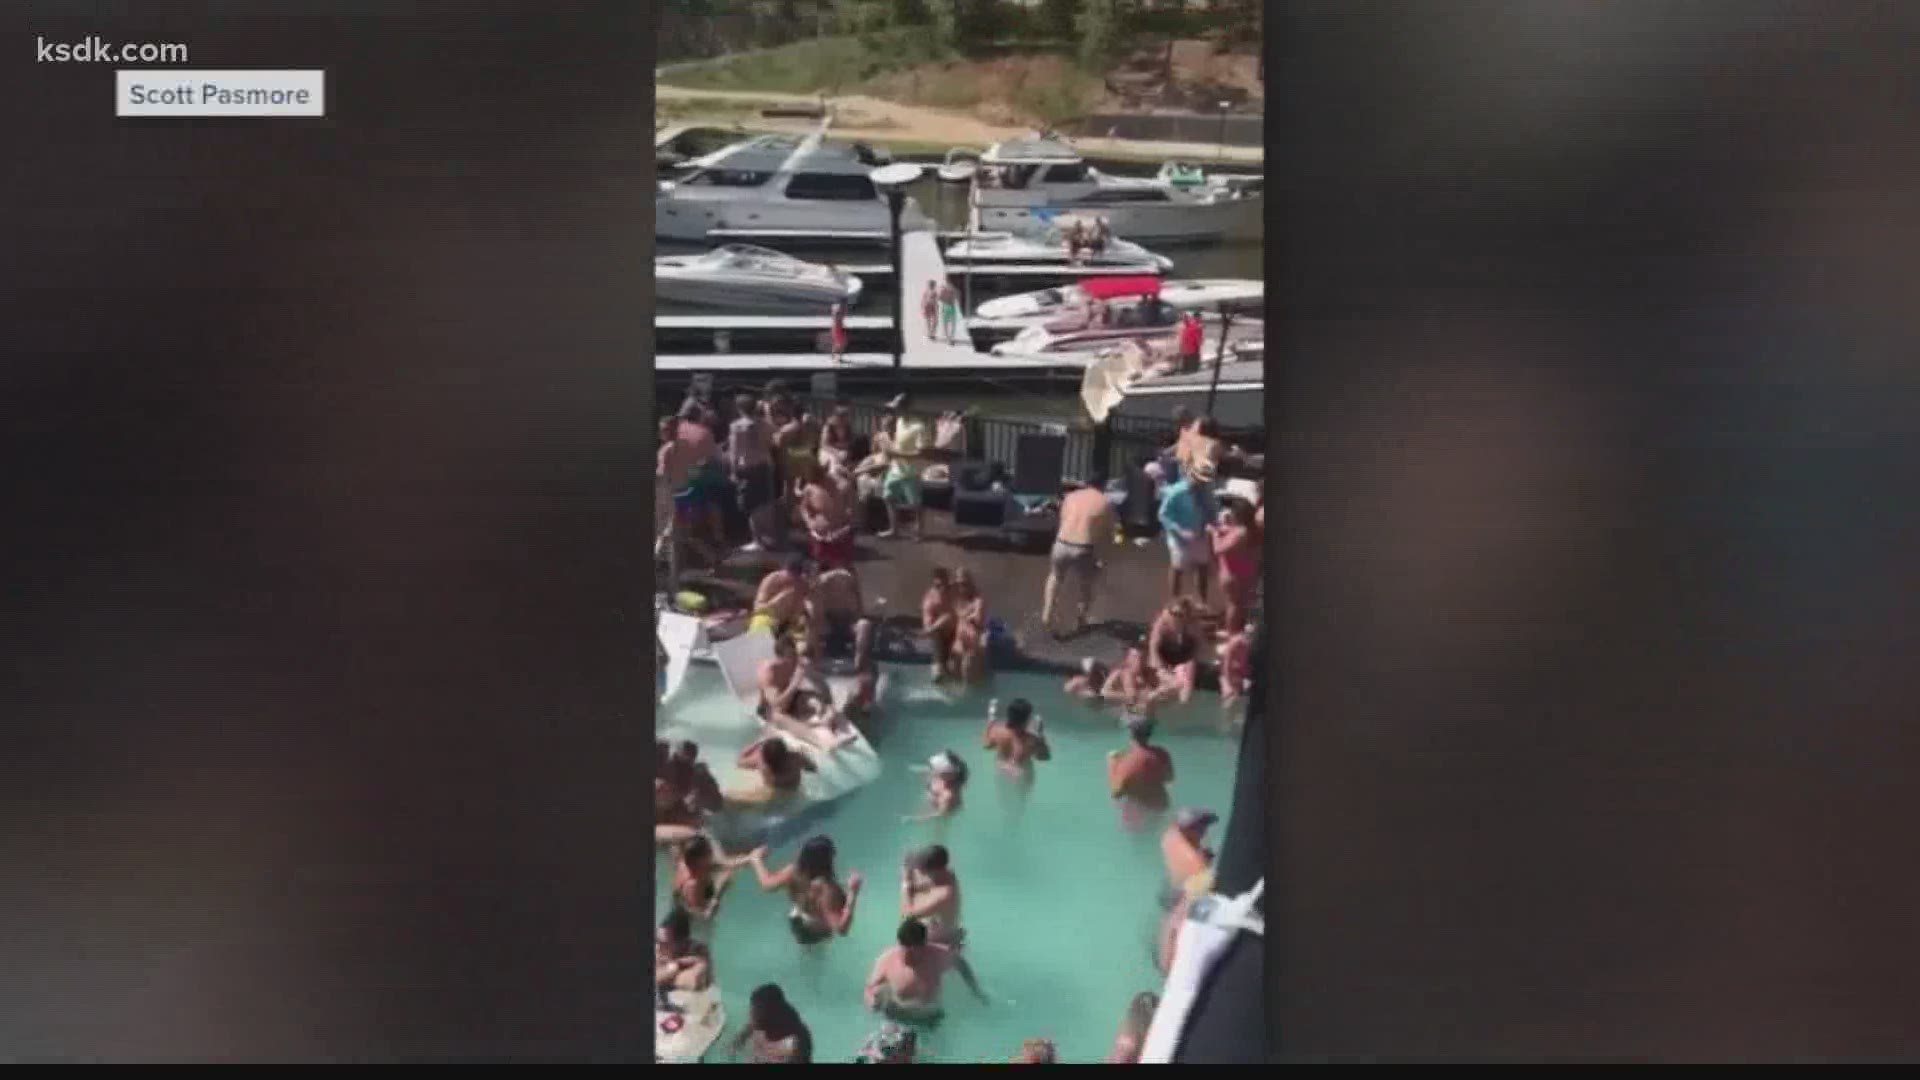 It's been about two weeks since viral videos showed crowds at Lake of the Ozarks.